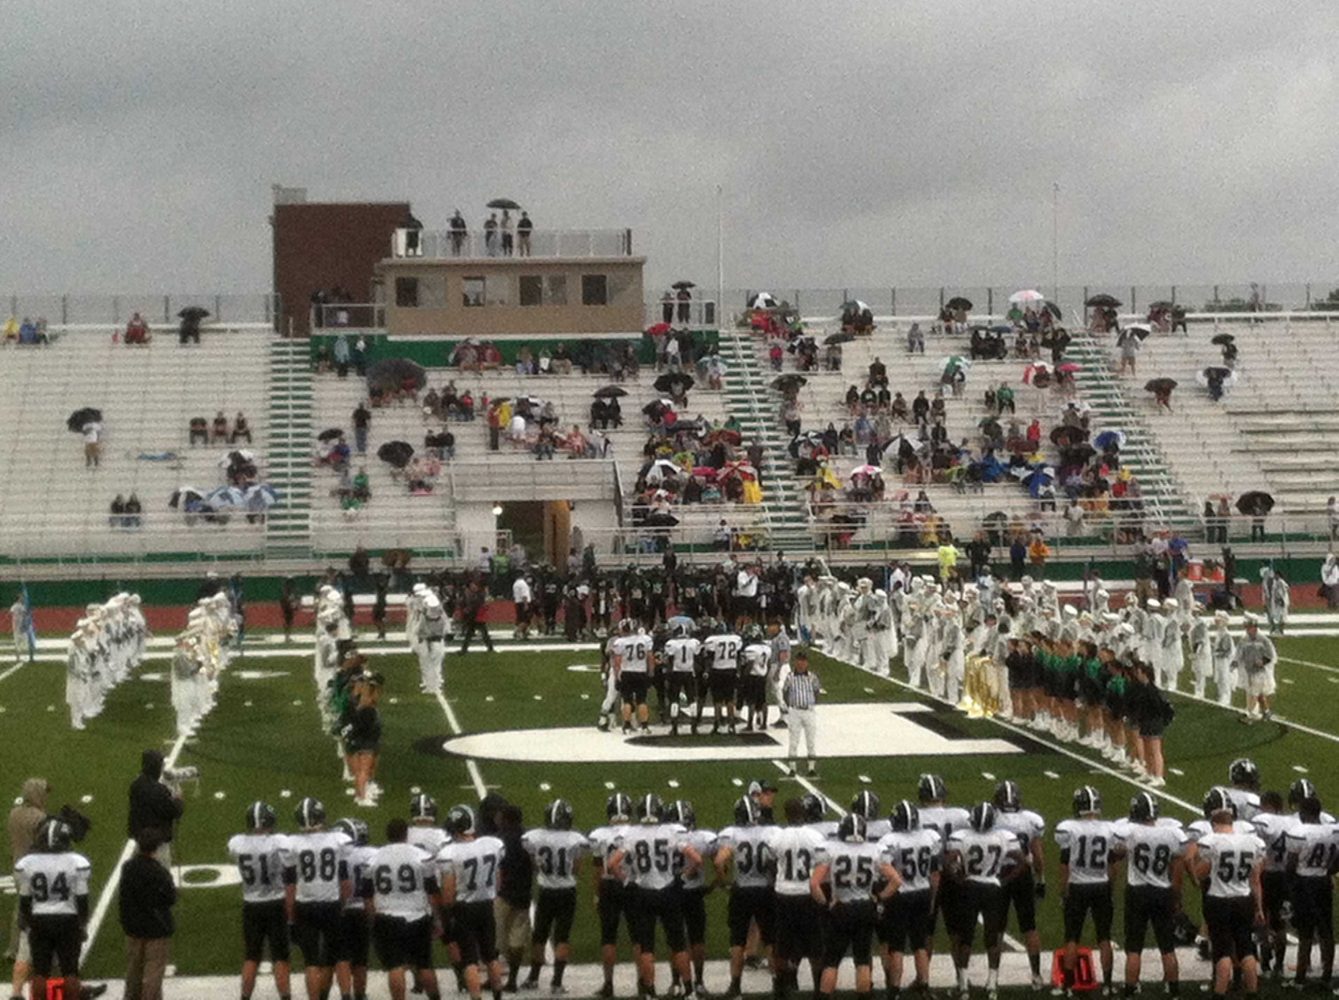 The+Pattonville+football+team+kicks+off+the+2012+season+with+a+new+stadium.+The+Pirates+return+to+the+field+on+Friday%2C+Aug.+30+against+Kirkwood+to+begin+the+2013+campaign.